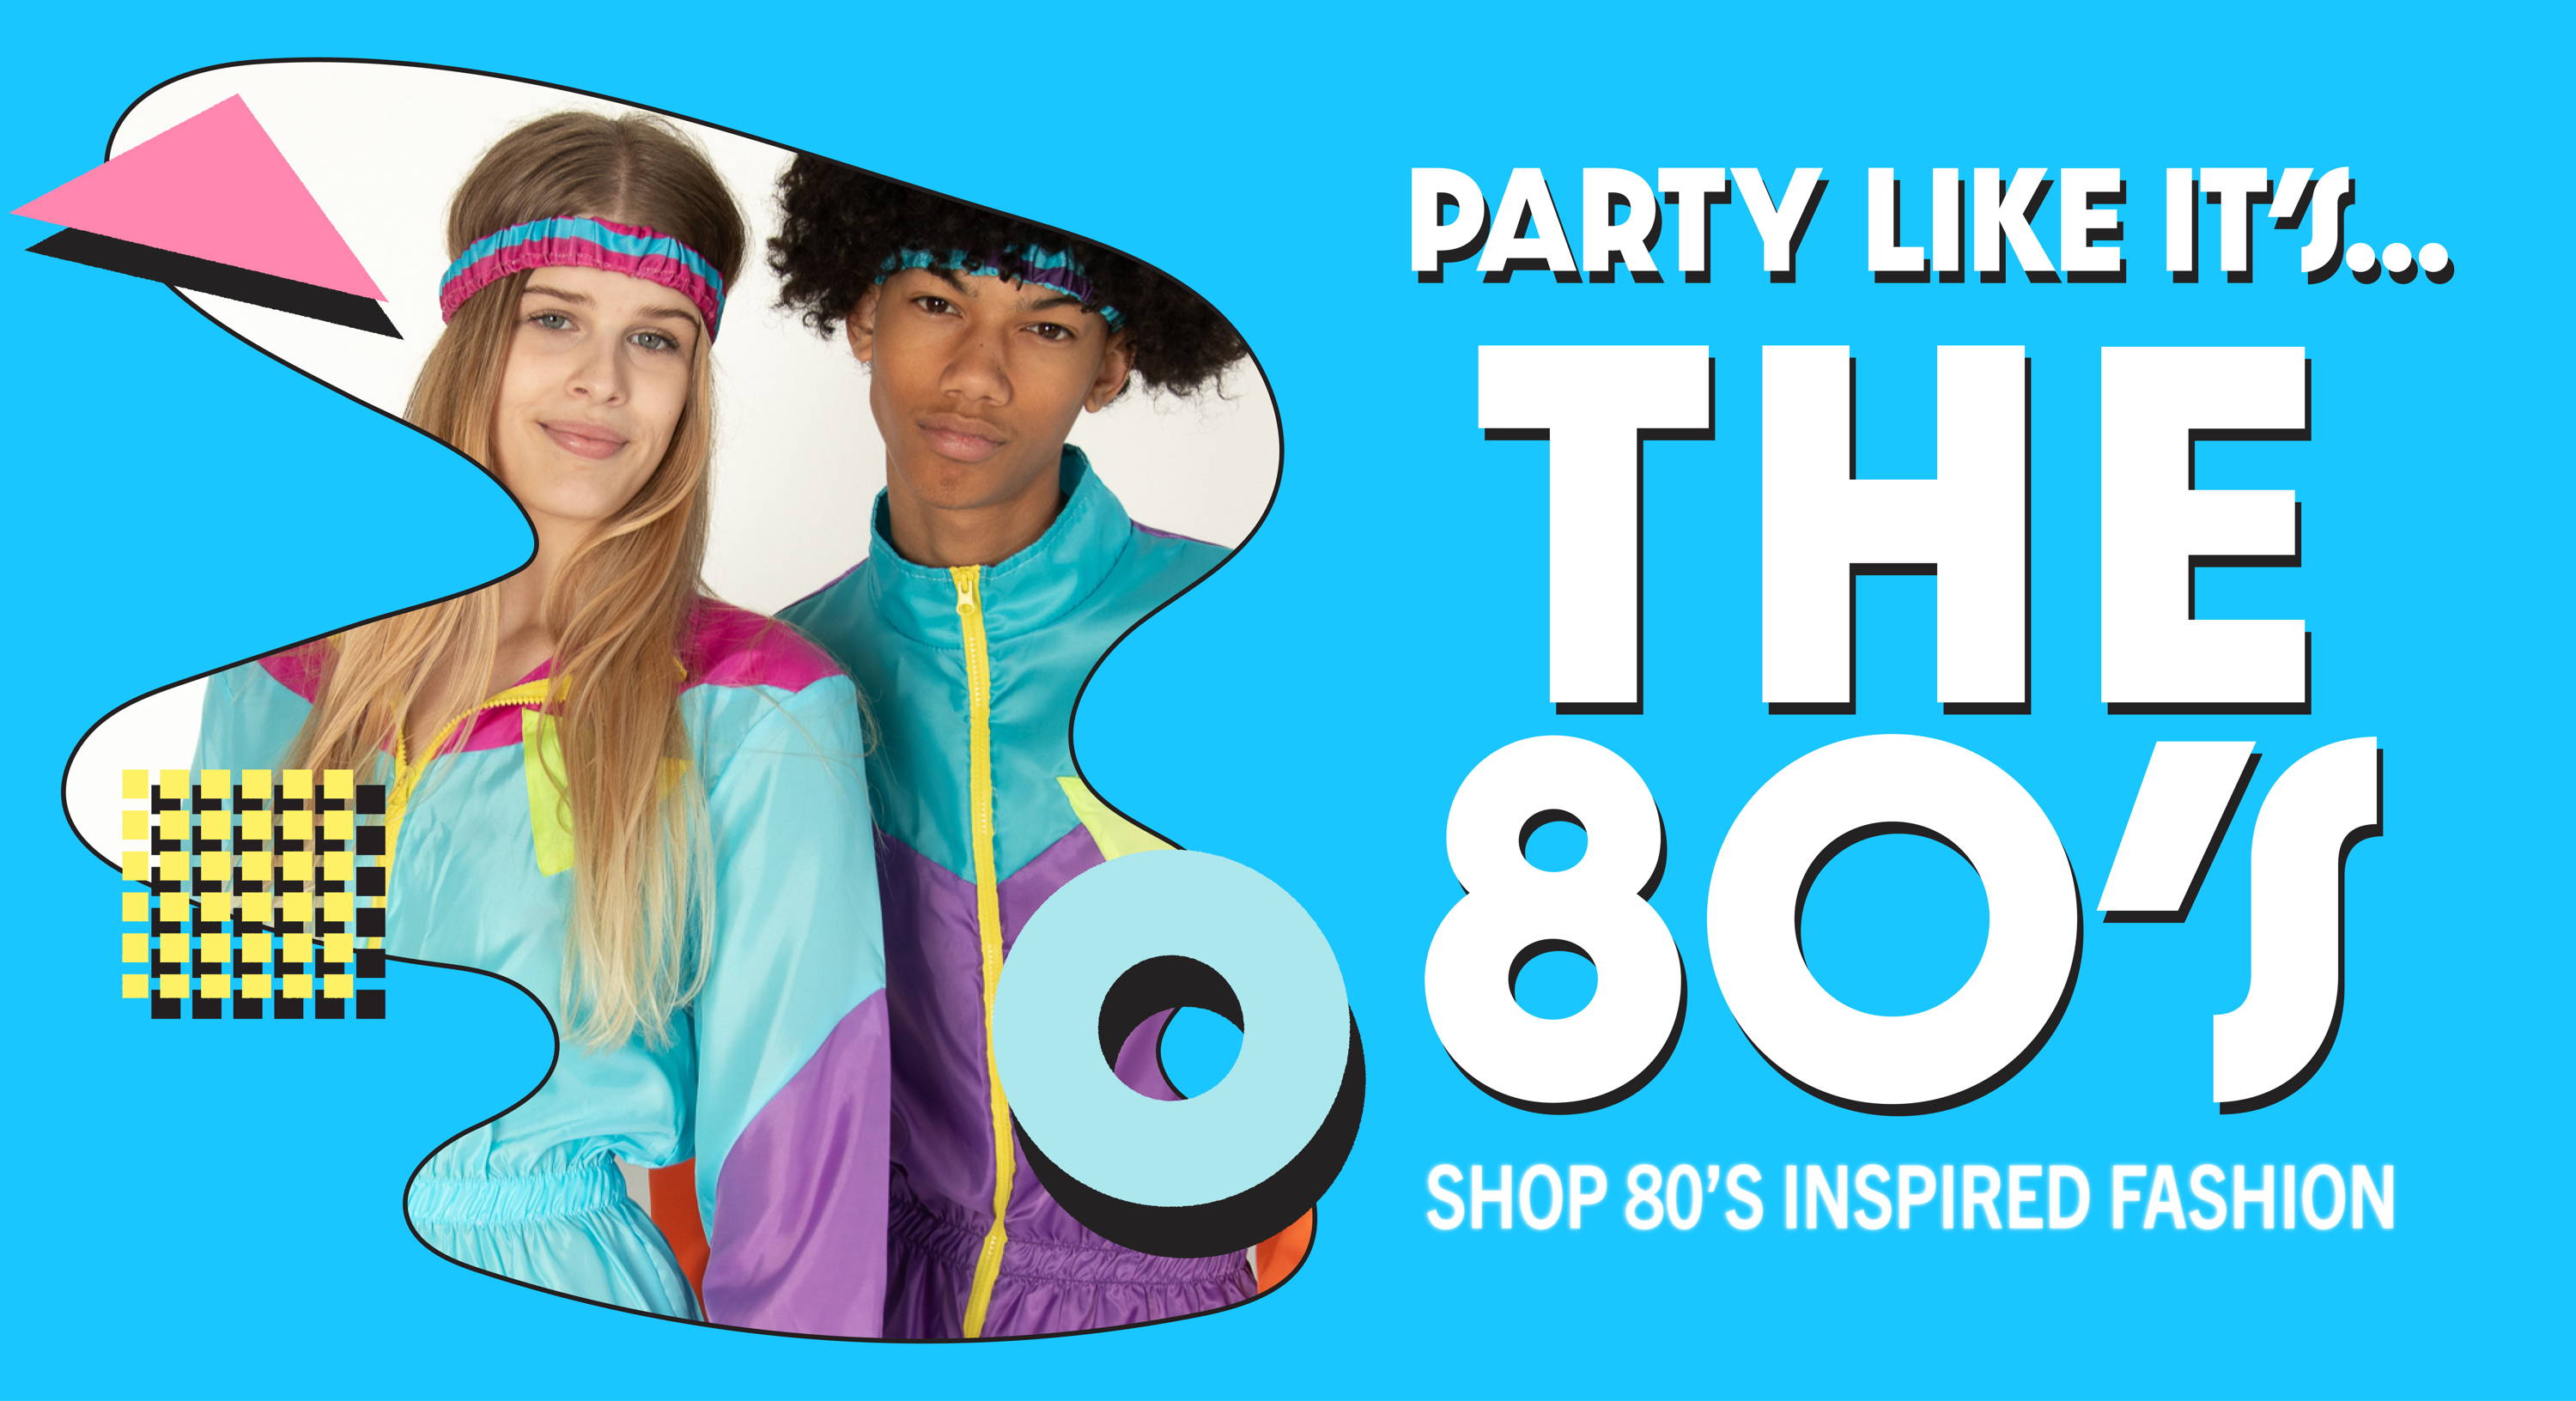 Party Like It's...The 80's. Shop 80's inspired fashion